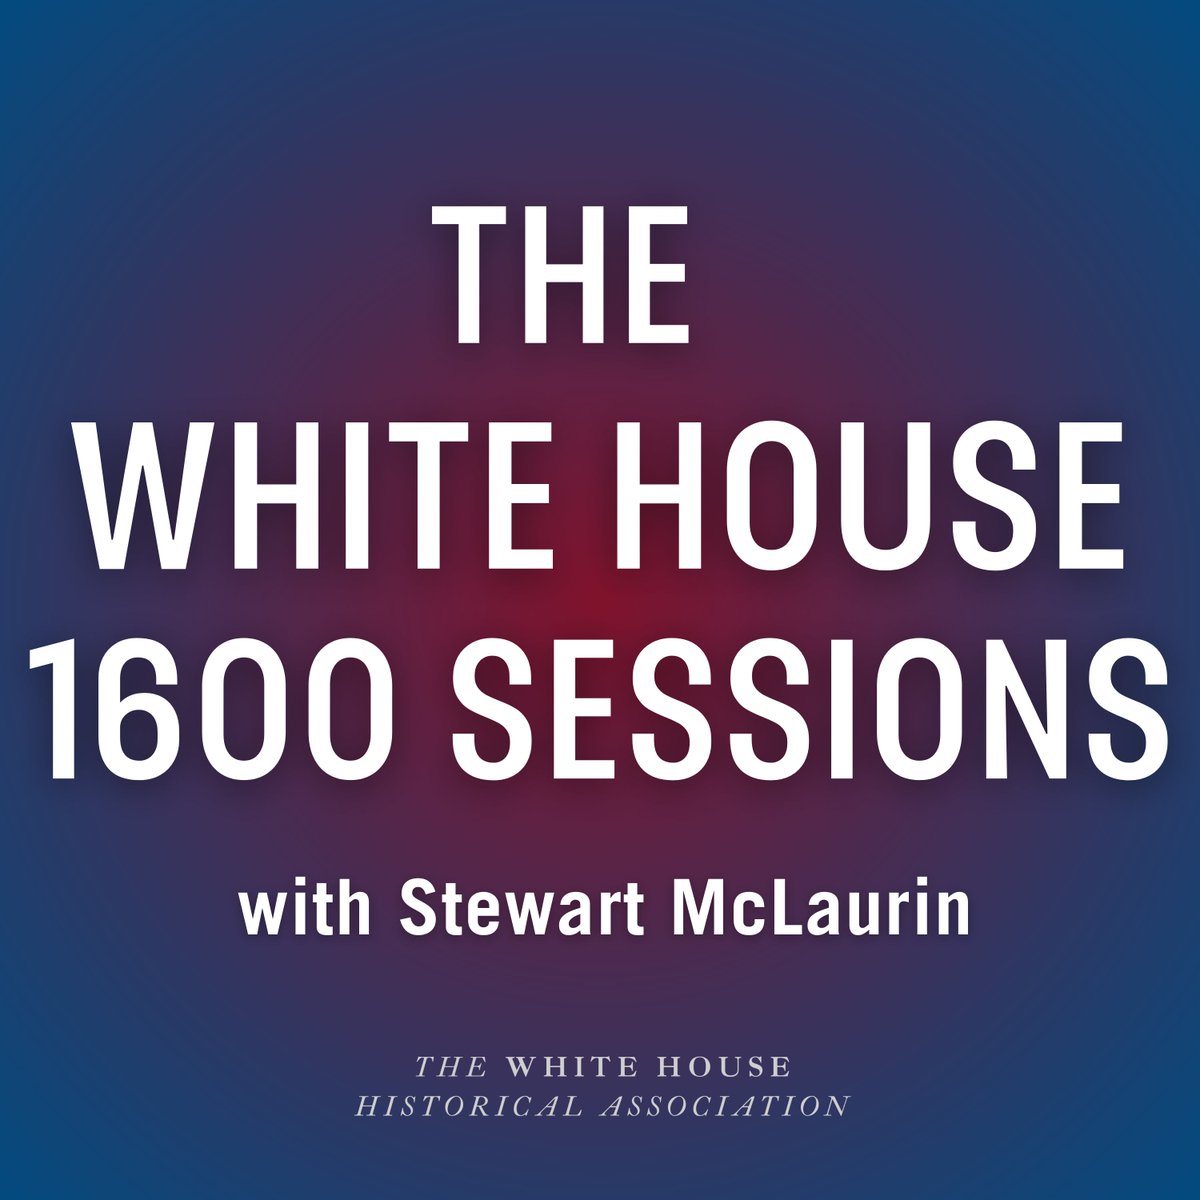 Exciting news! 📣 We are proud to announce that our podcast 'The White House 1600 Sessions' hosted by @WHhistoryPres has won multiple #CommunicatorAwards. Thank you @CommAwards for recognizing our White House history team's hard work!